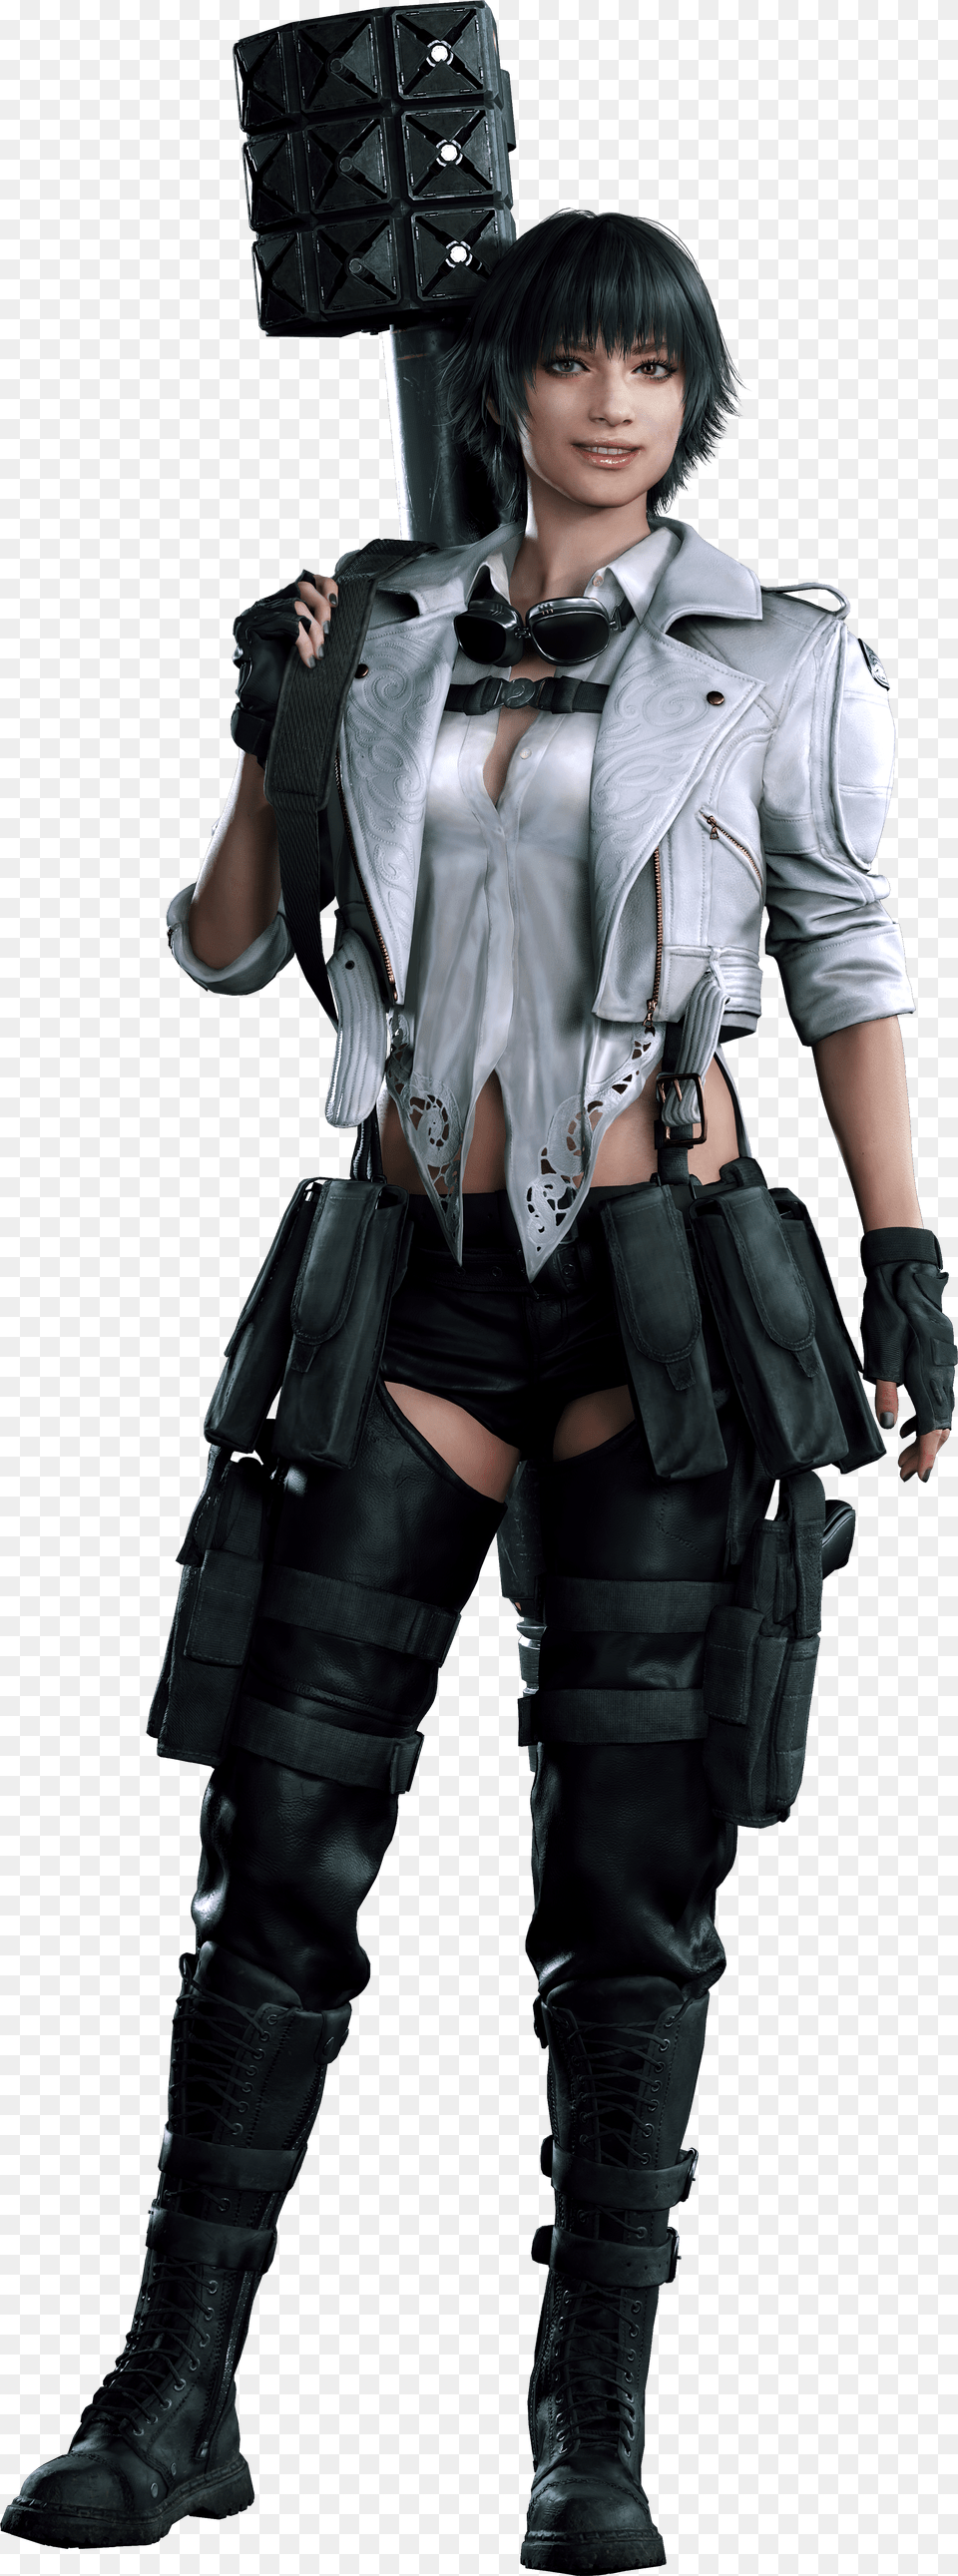 Capcom Co Devil May Cry 5 Trish, Clothing, Costume, Person, Glove Png Image